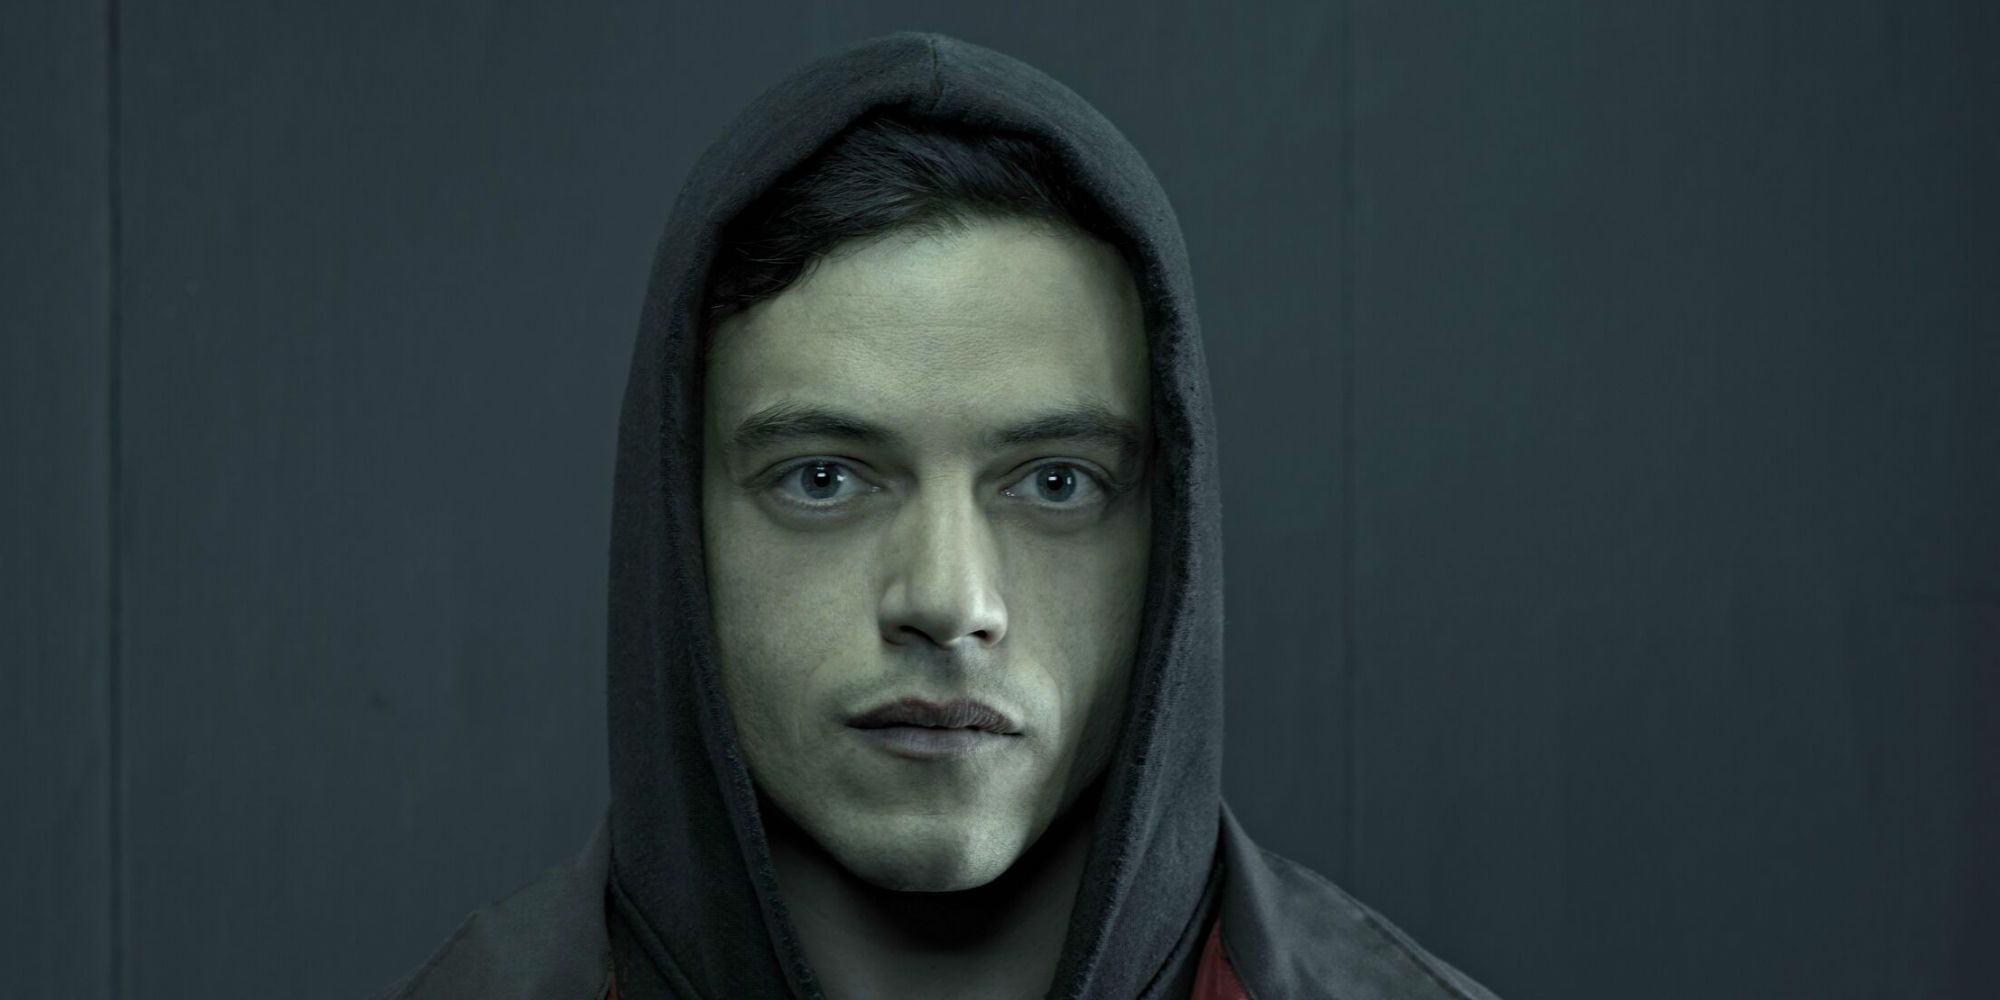 Stream Mr.Robot - Soundtrack (Mac Quayle - DDoS Hacking Song) by